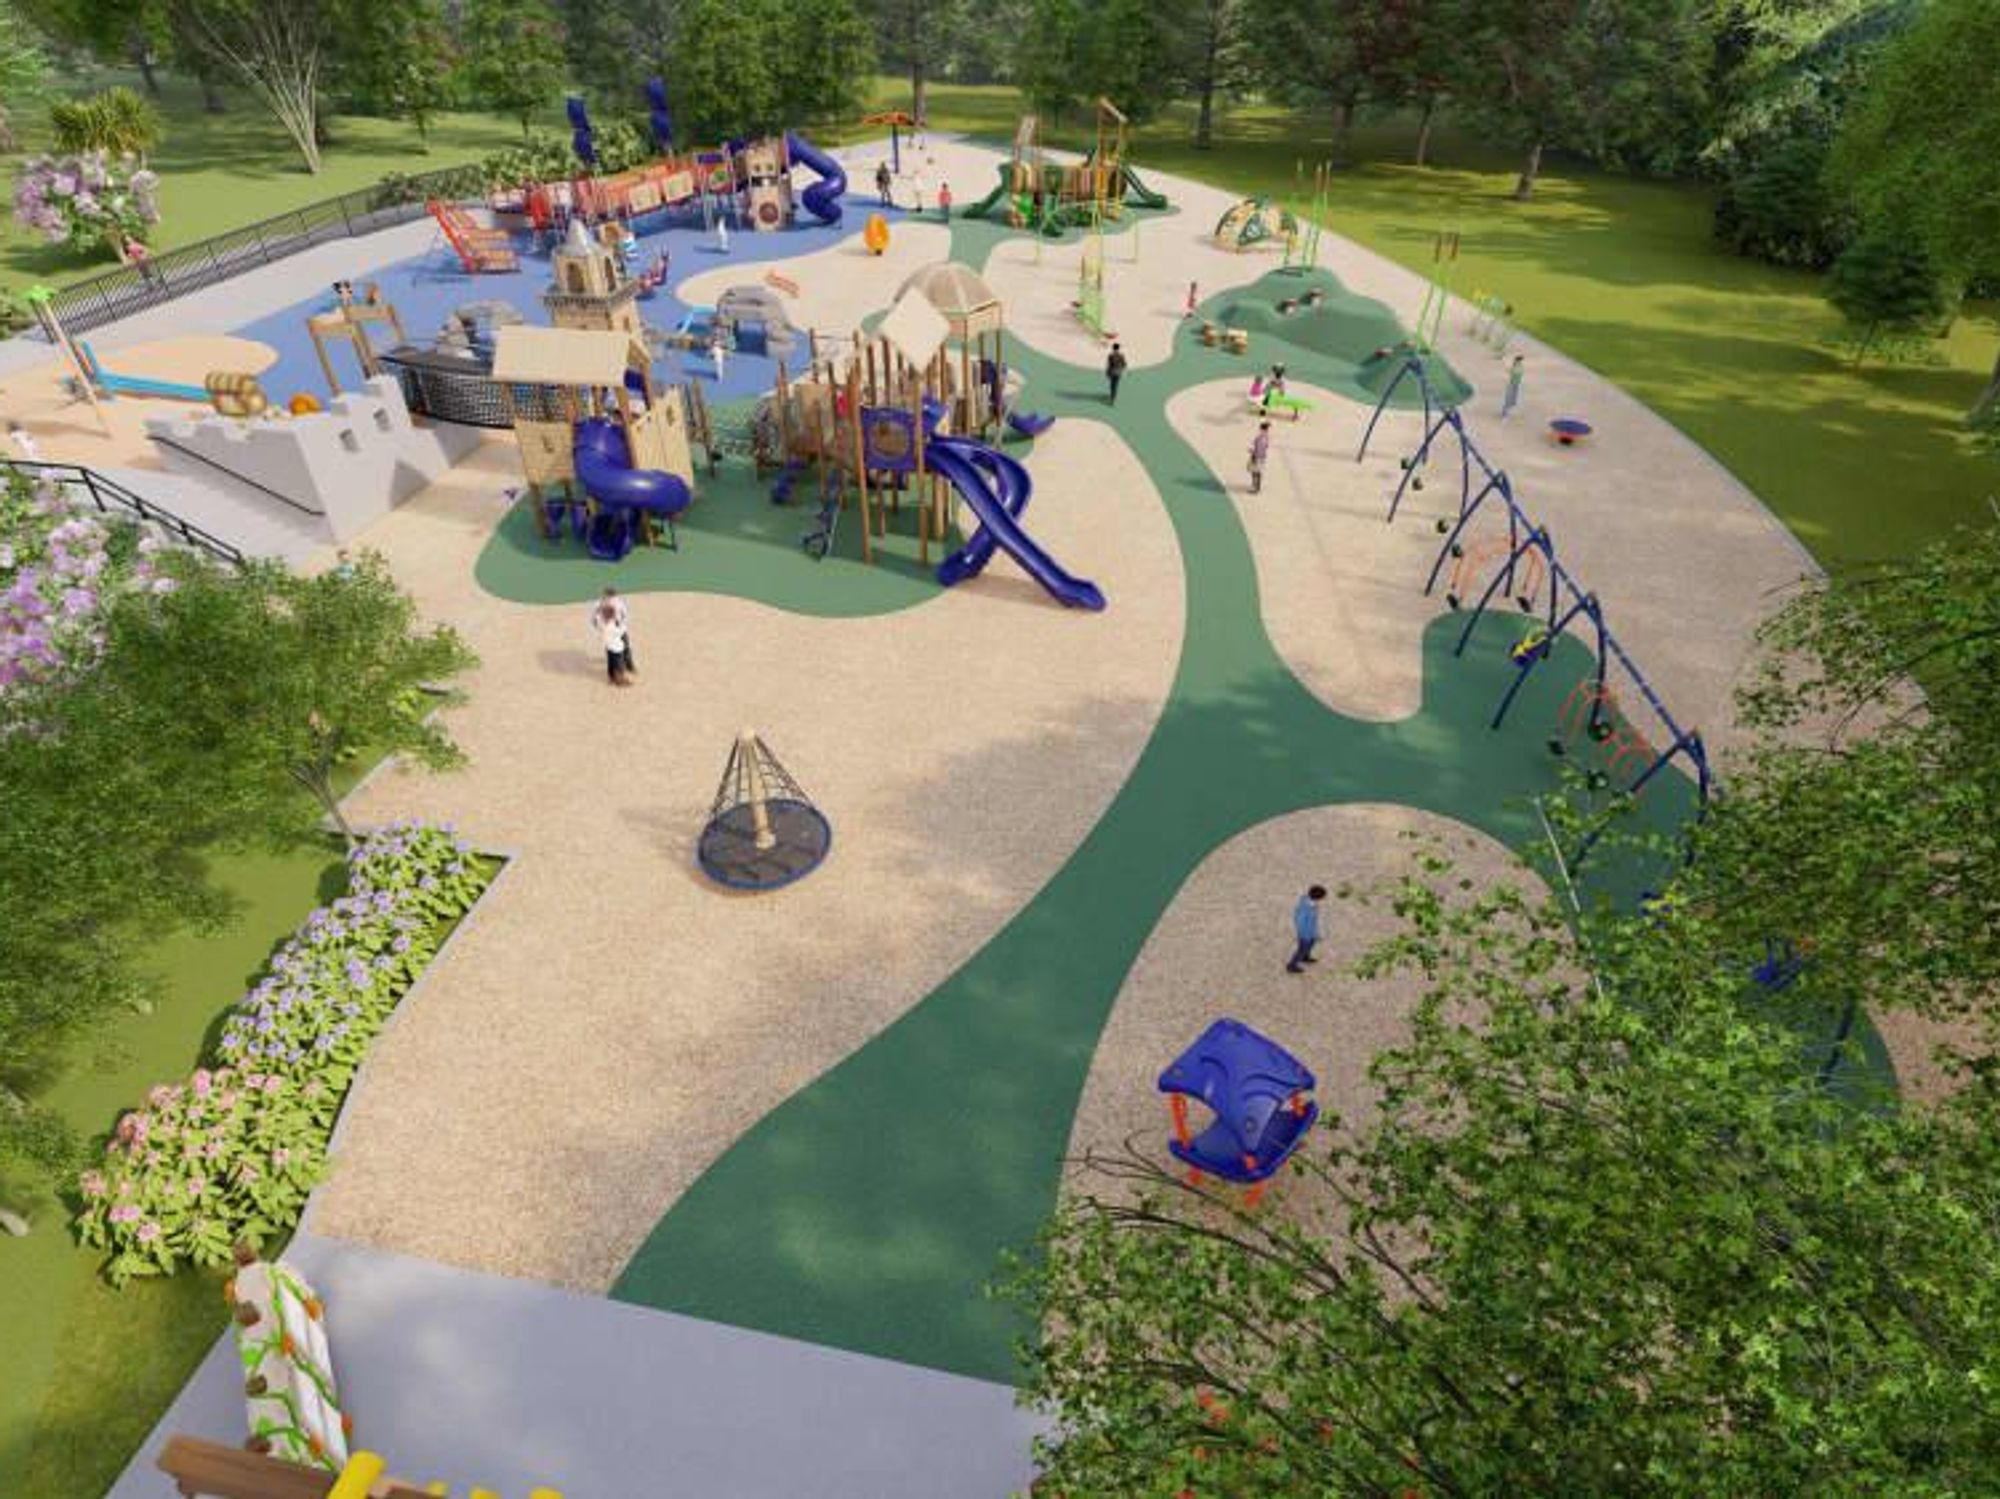 A rendering of a pirate-themed playground.